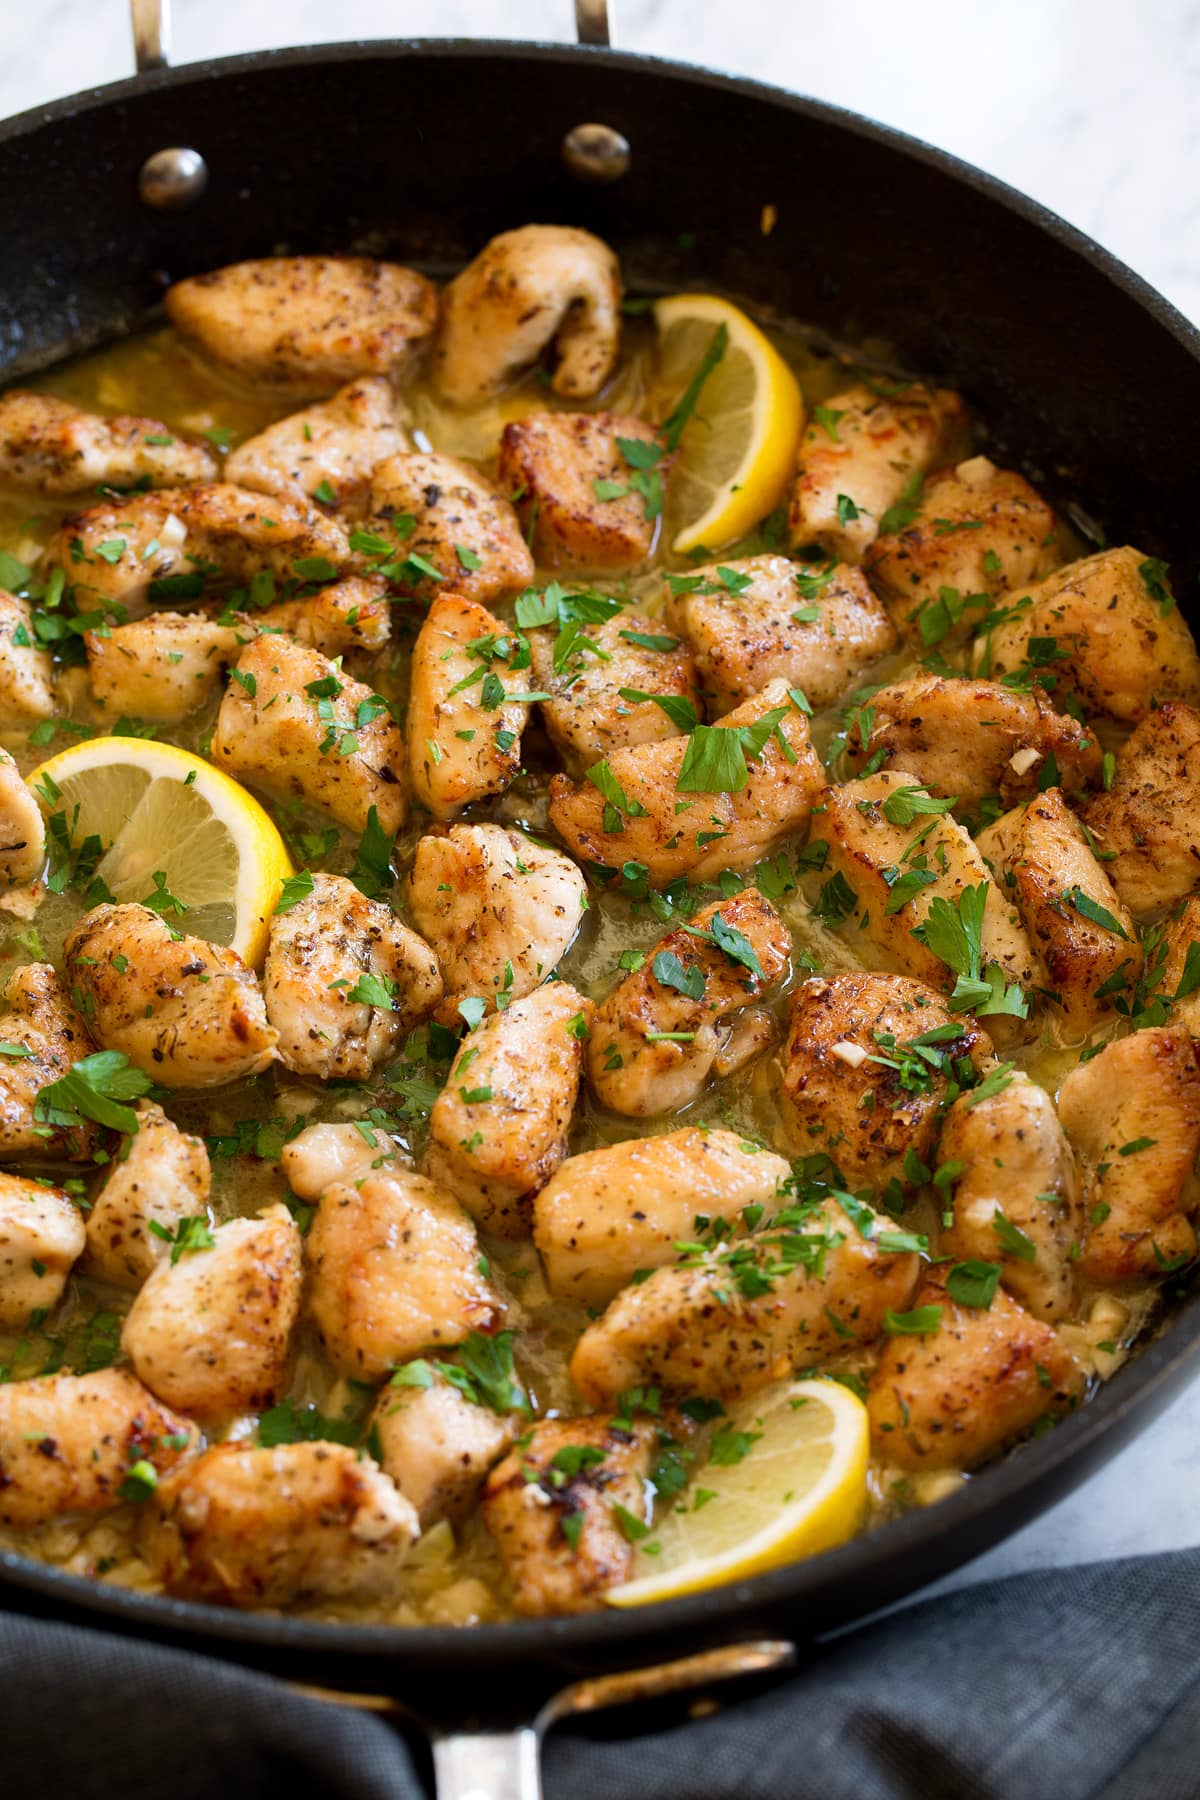 Chicken scampi with butter and wine shown in a dark skillet.